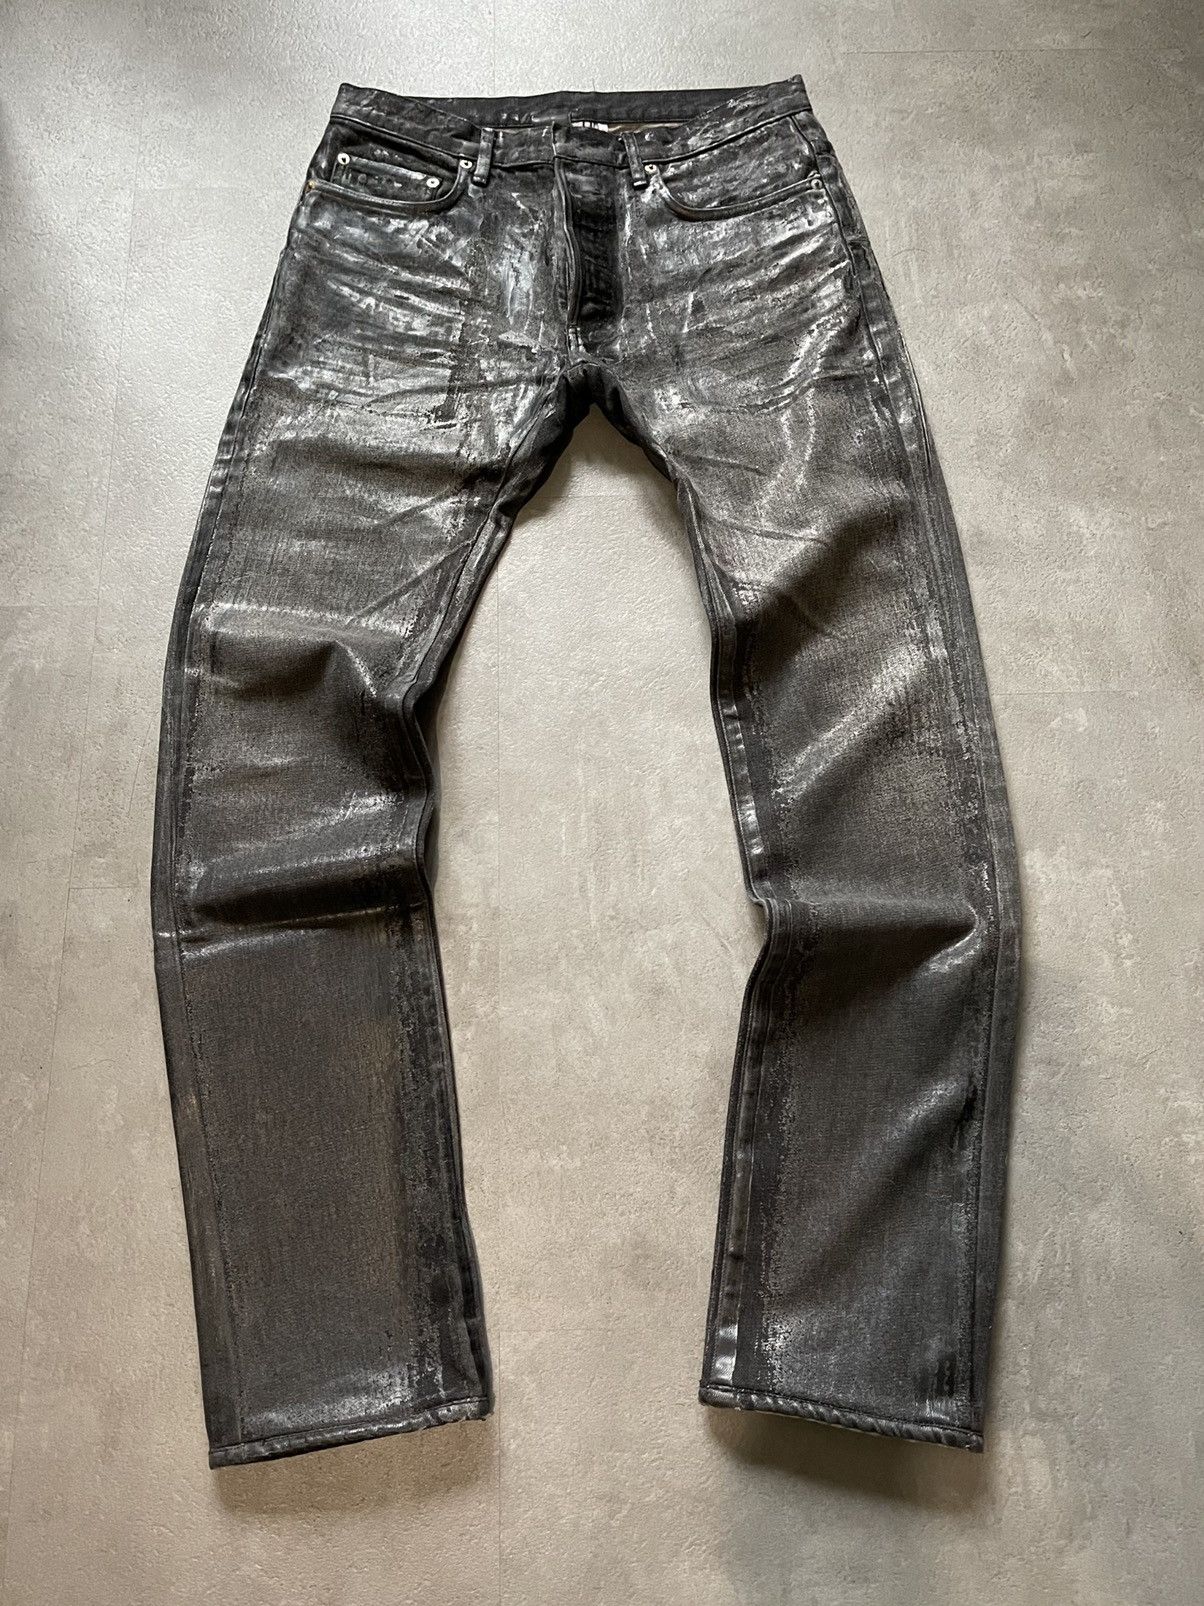 Dior Dior Homme “Luster” Waxed Clawmark Denim Jeans-AW03 | Grailed